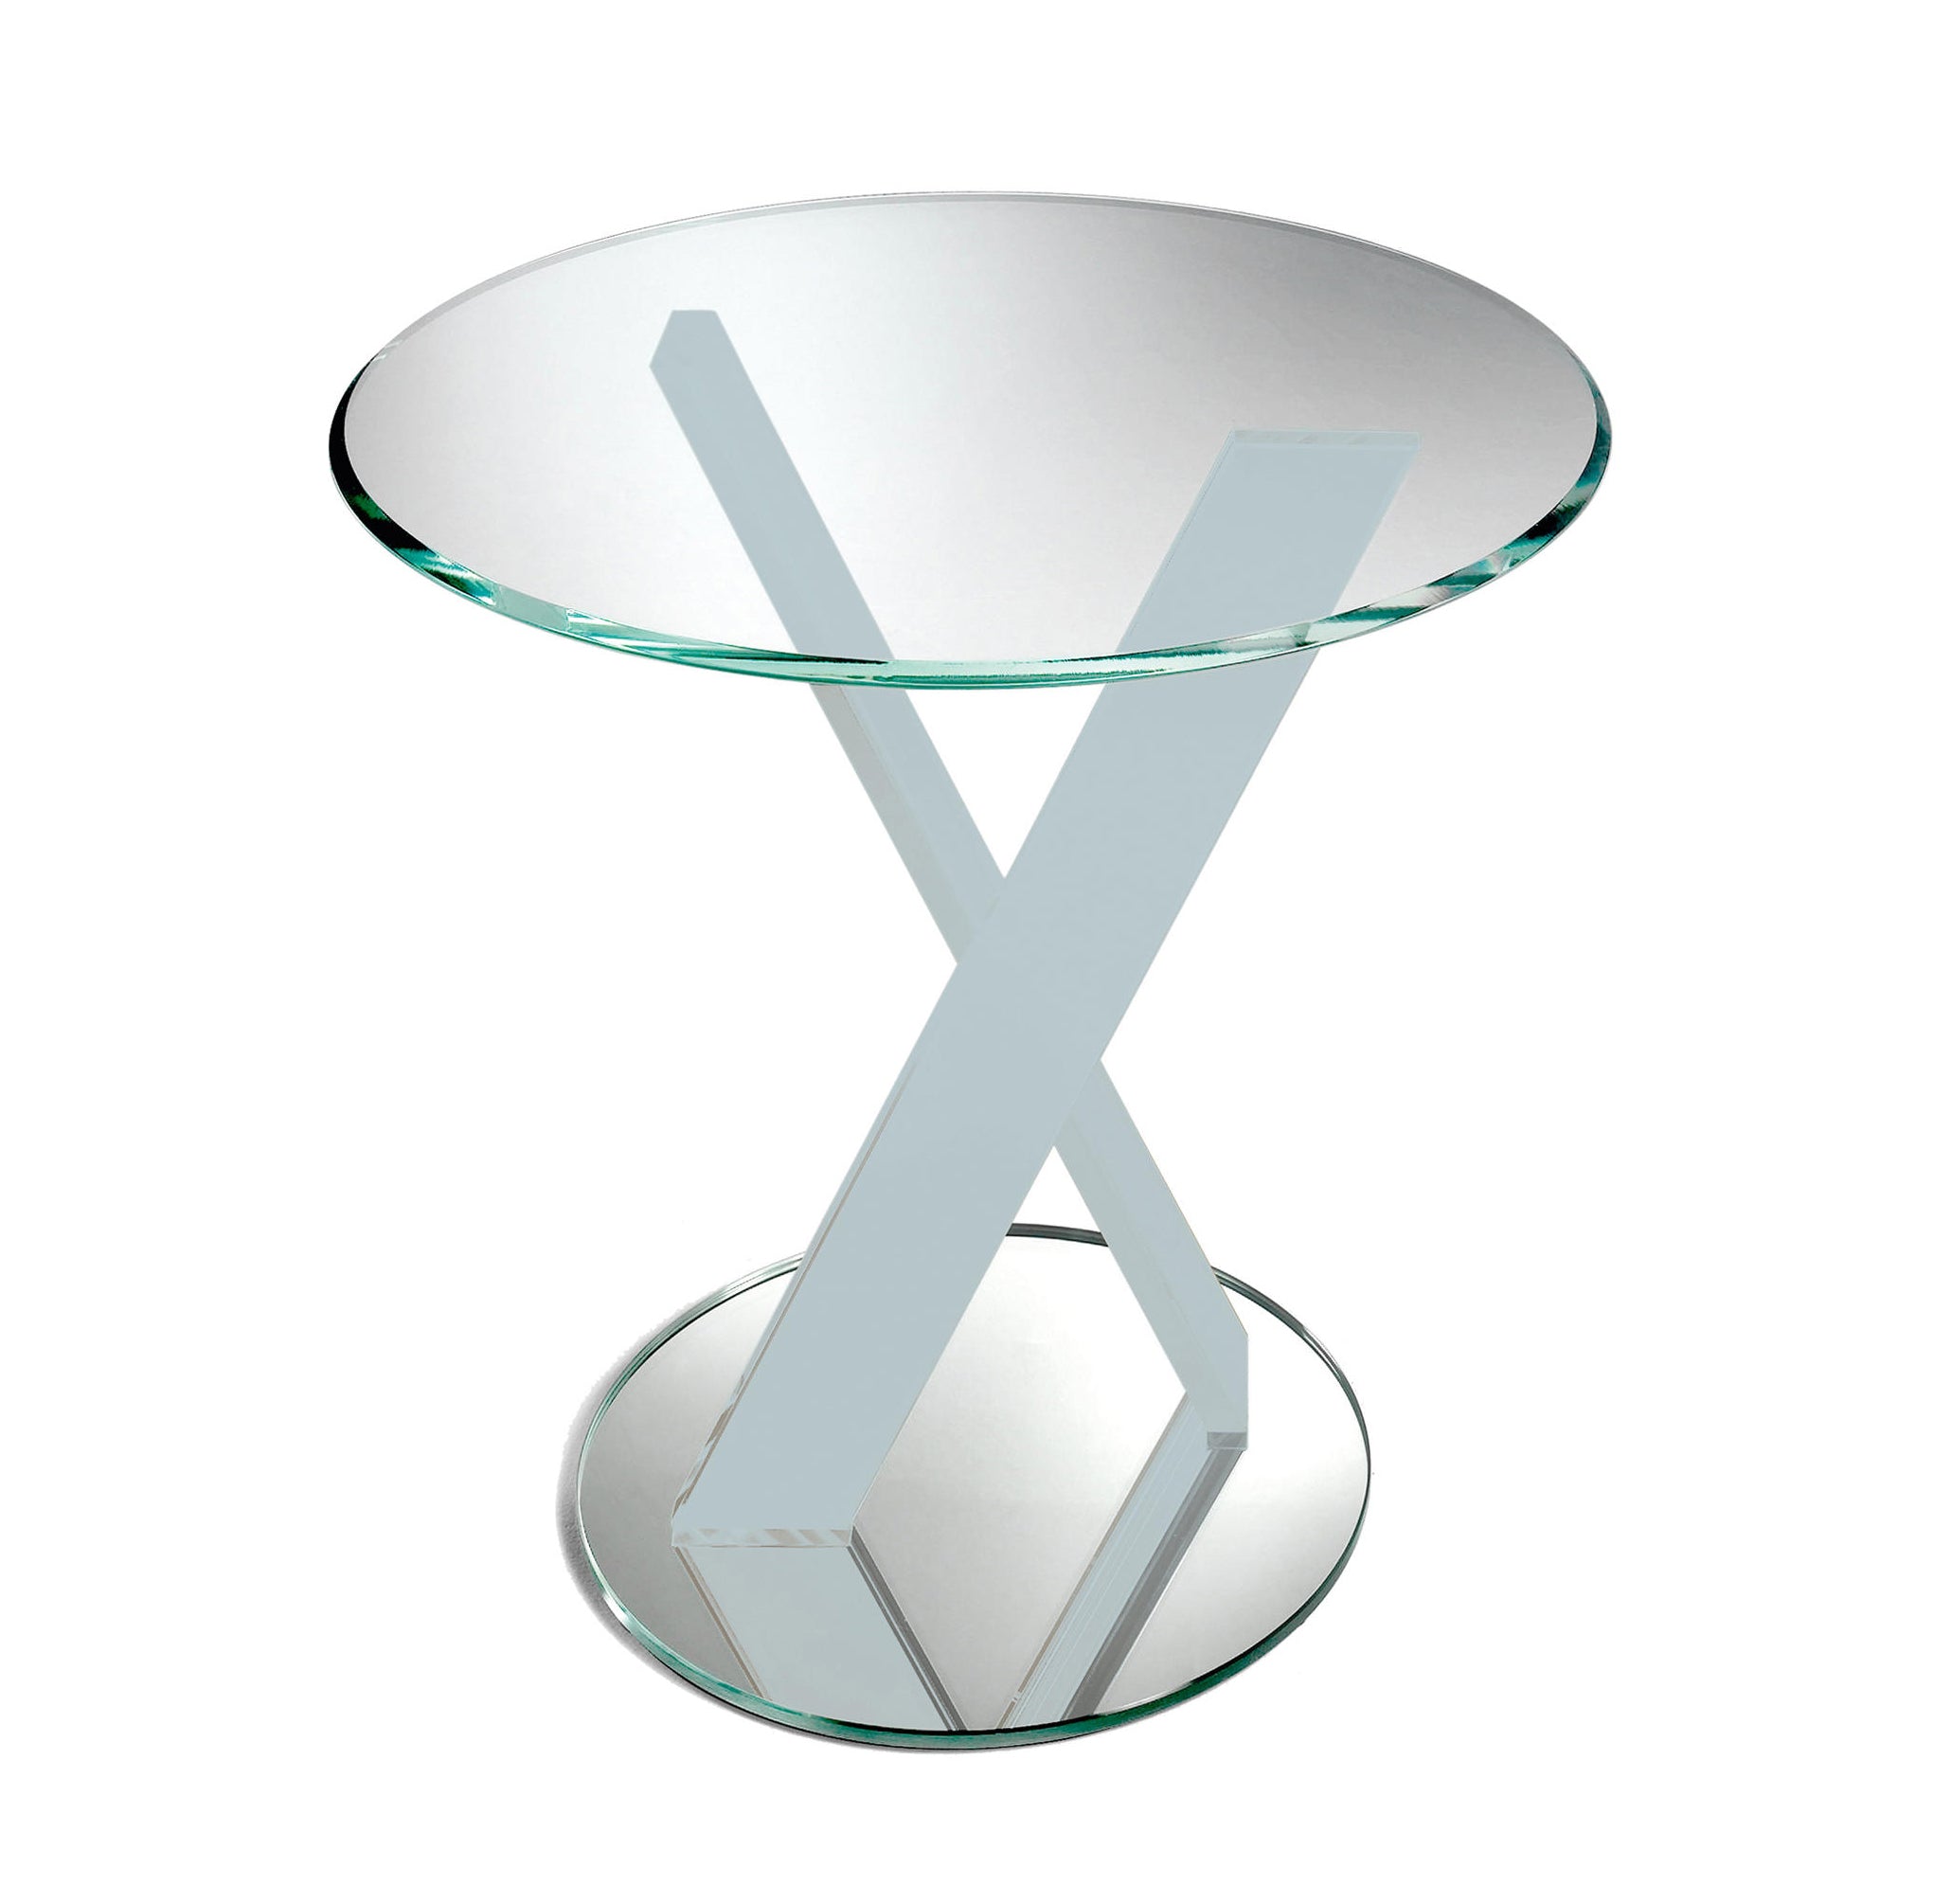 MISTER X side table1a